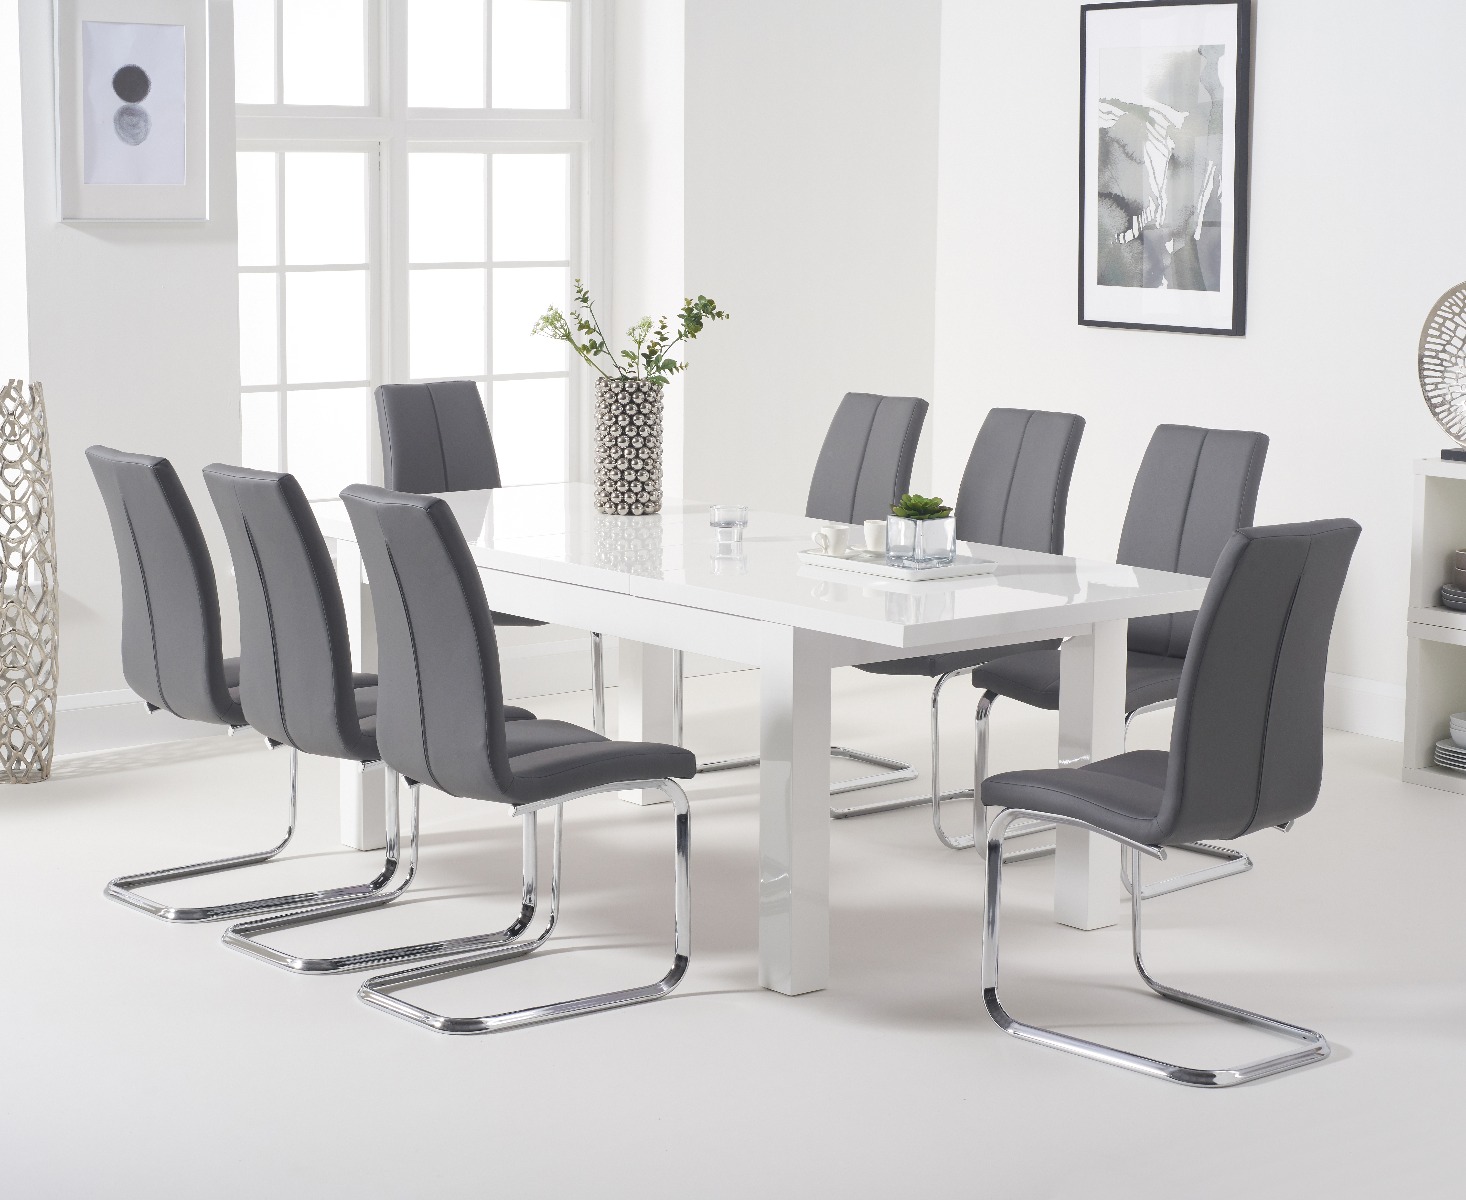 Atlanta White Gloss 160220cm Extending Dining Table With 4 Grey Tarin Chairs